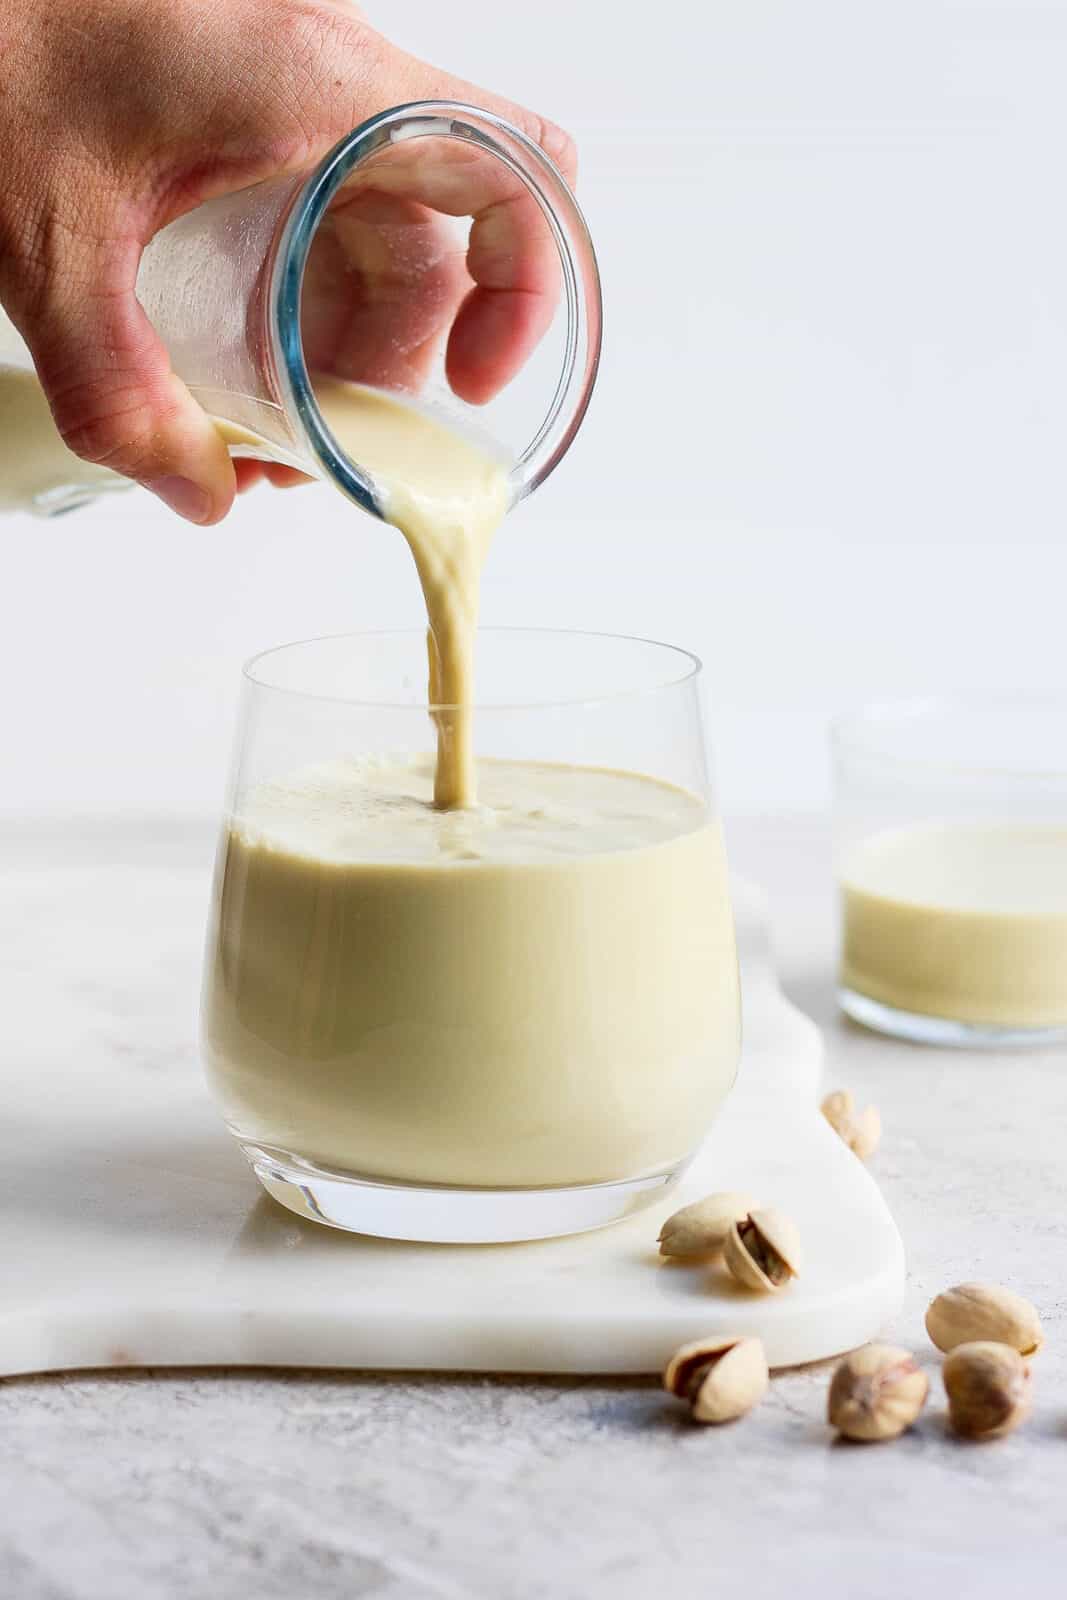 Pouring pistachio milk from a carafe to a glass.